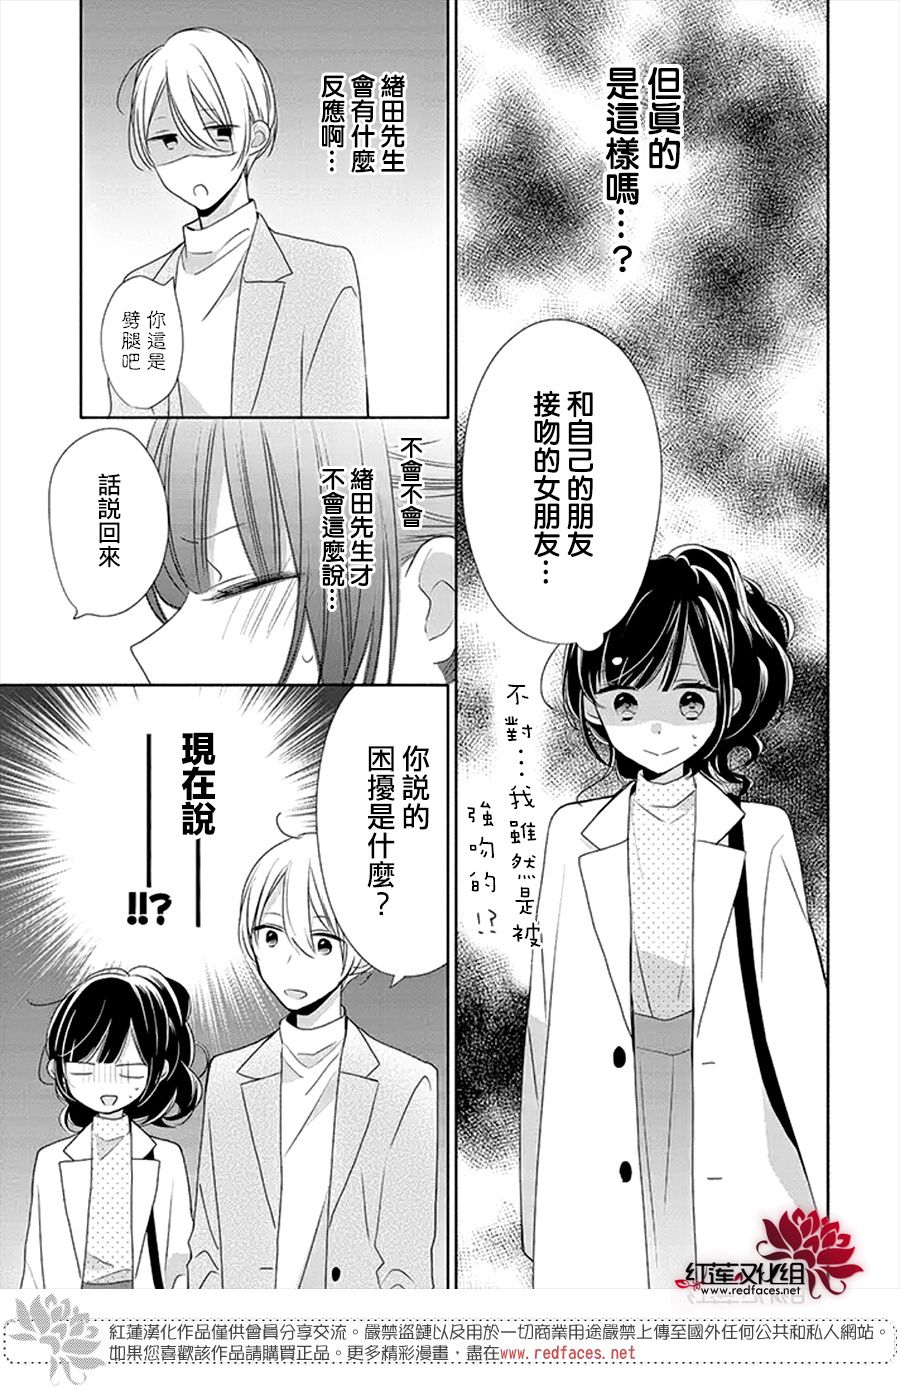 If given a second chance - 25话 - 5